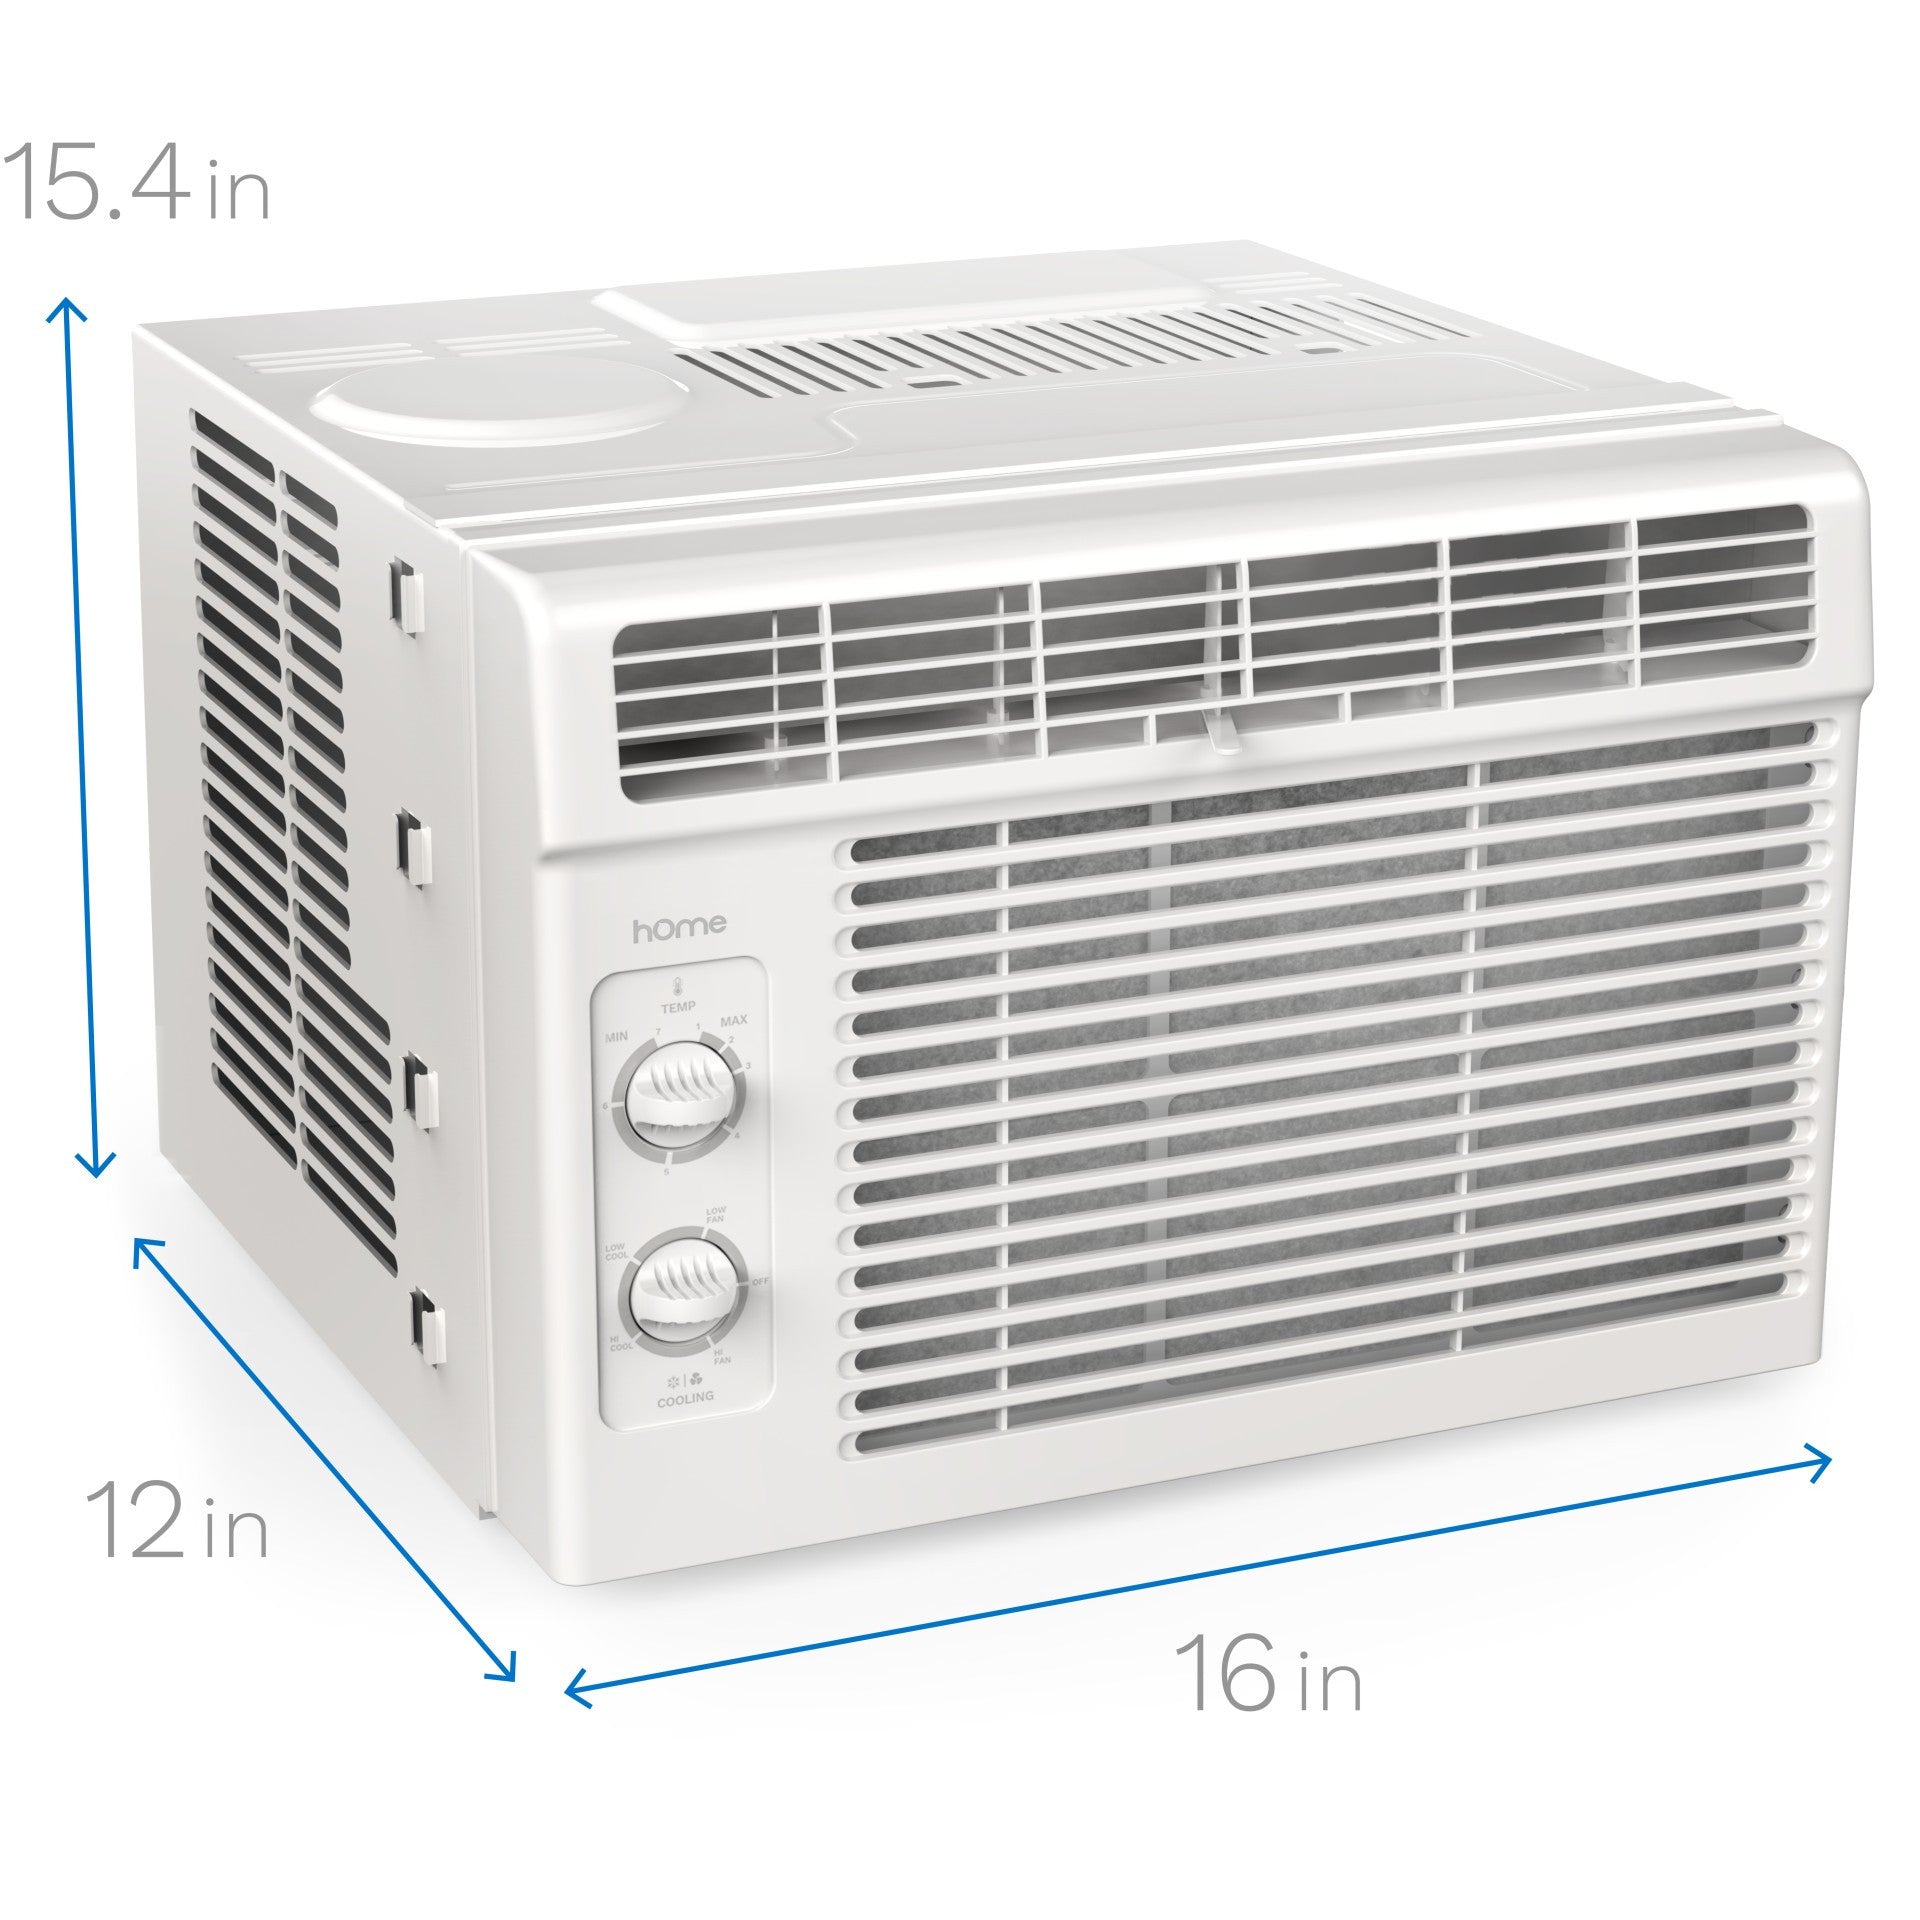 Length of air conditioner